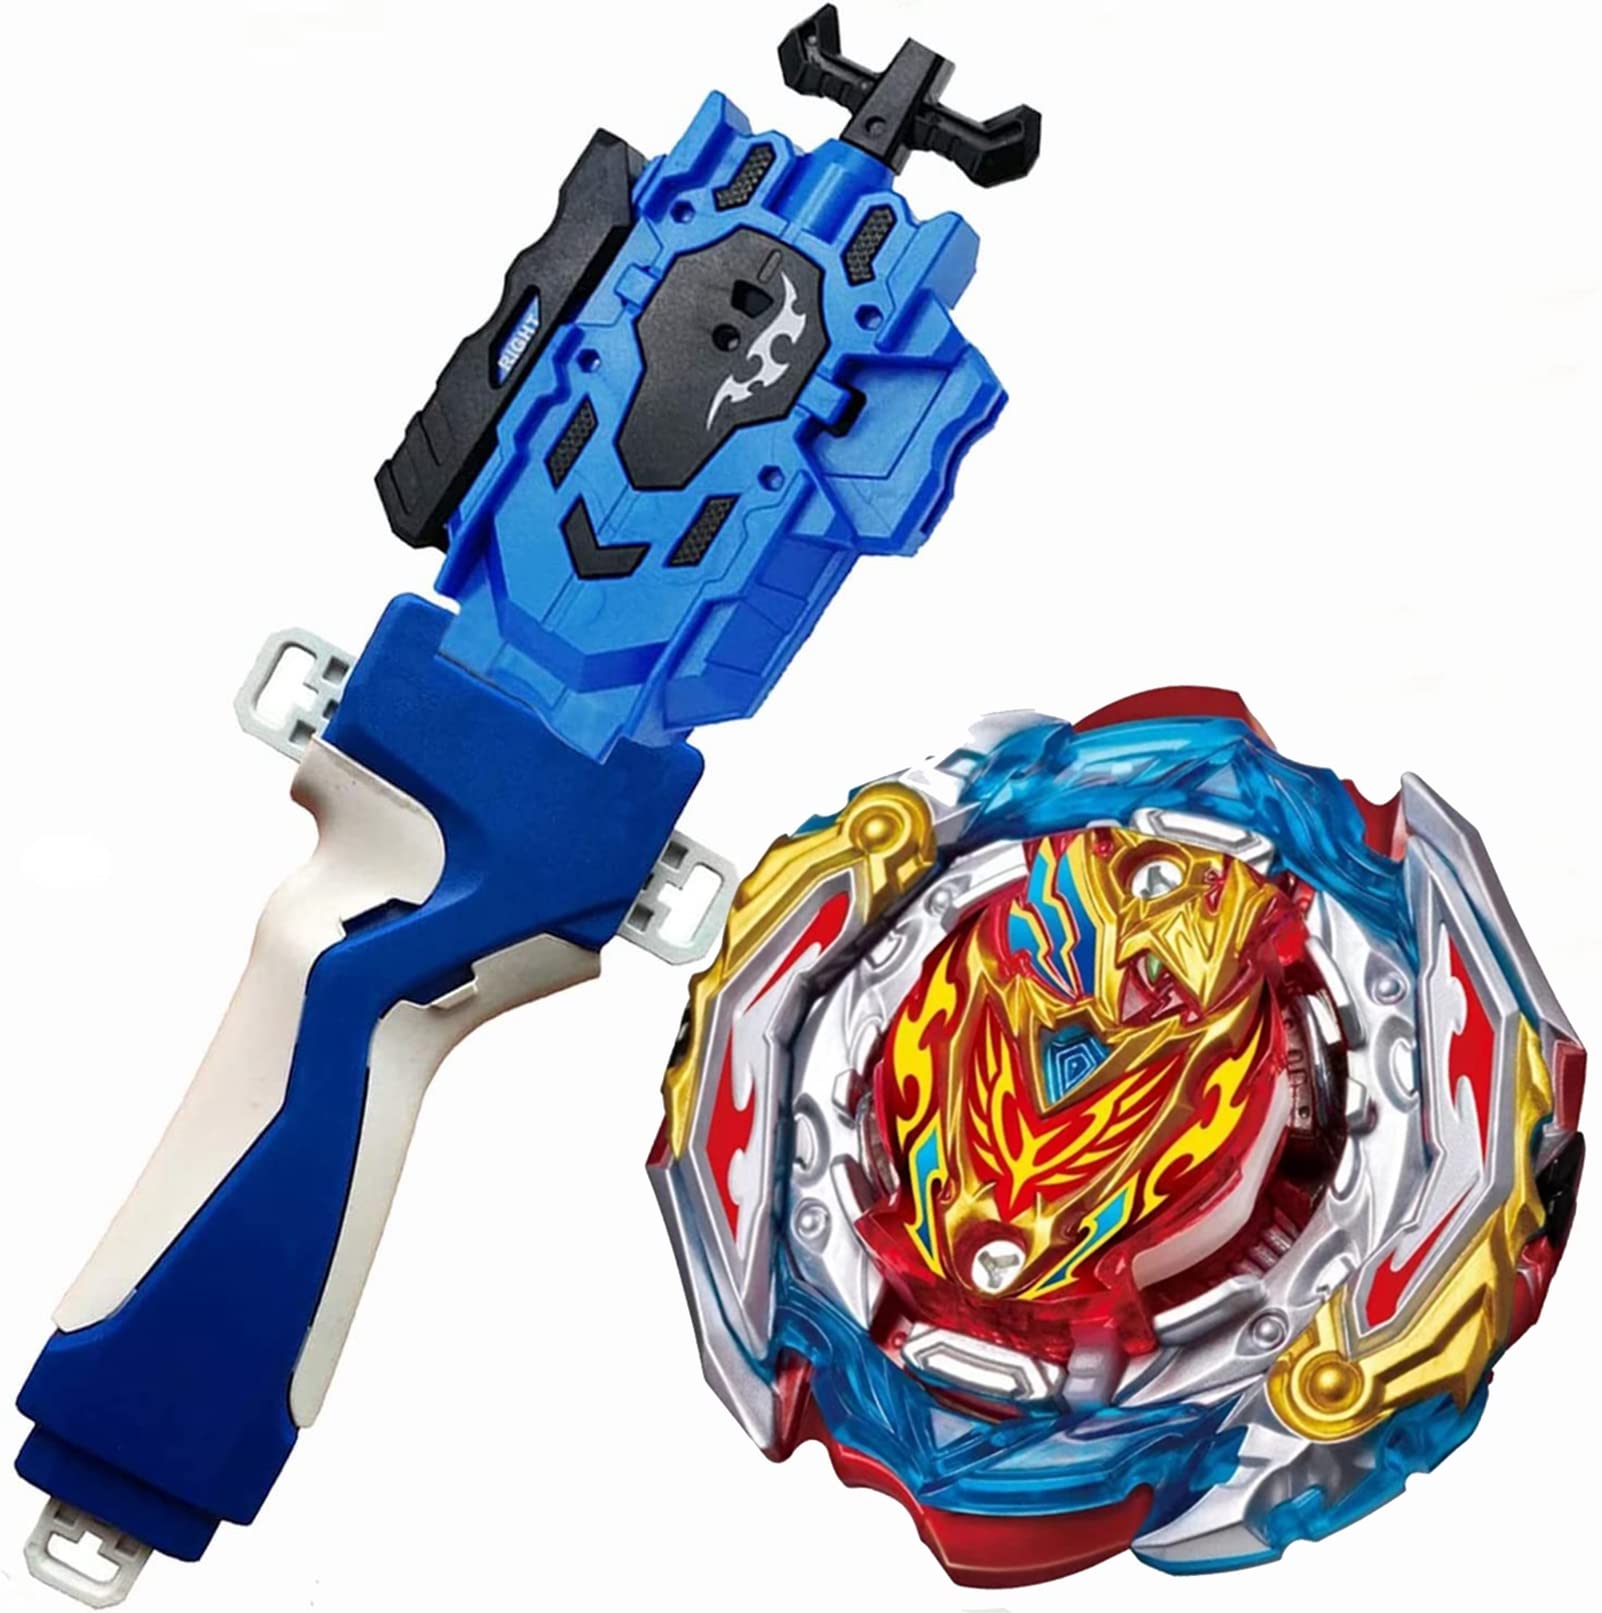 TORNADOGYRO COMBAT Bay Blades for 8-12 Gaming Top Toys Bey Battle Burst BU B-201 Zest Achilles Illegal Quattro'-4 Battling Tops Metal Fusion Left Right String Launcher Set with Grip Gift for Boys 6-8